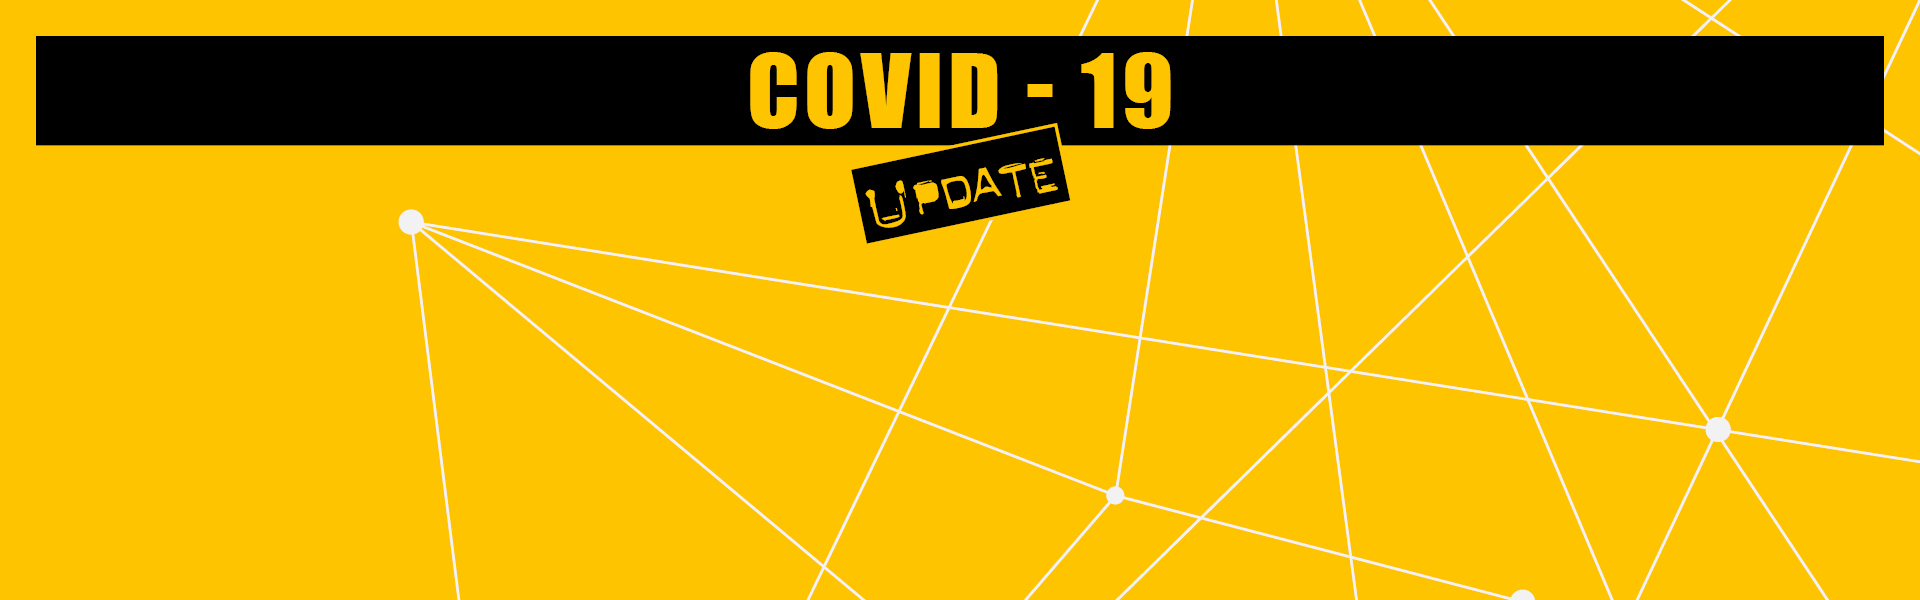 Covid-19 Update for 25th March